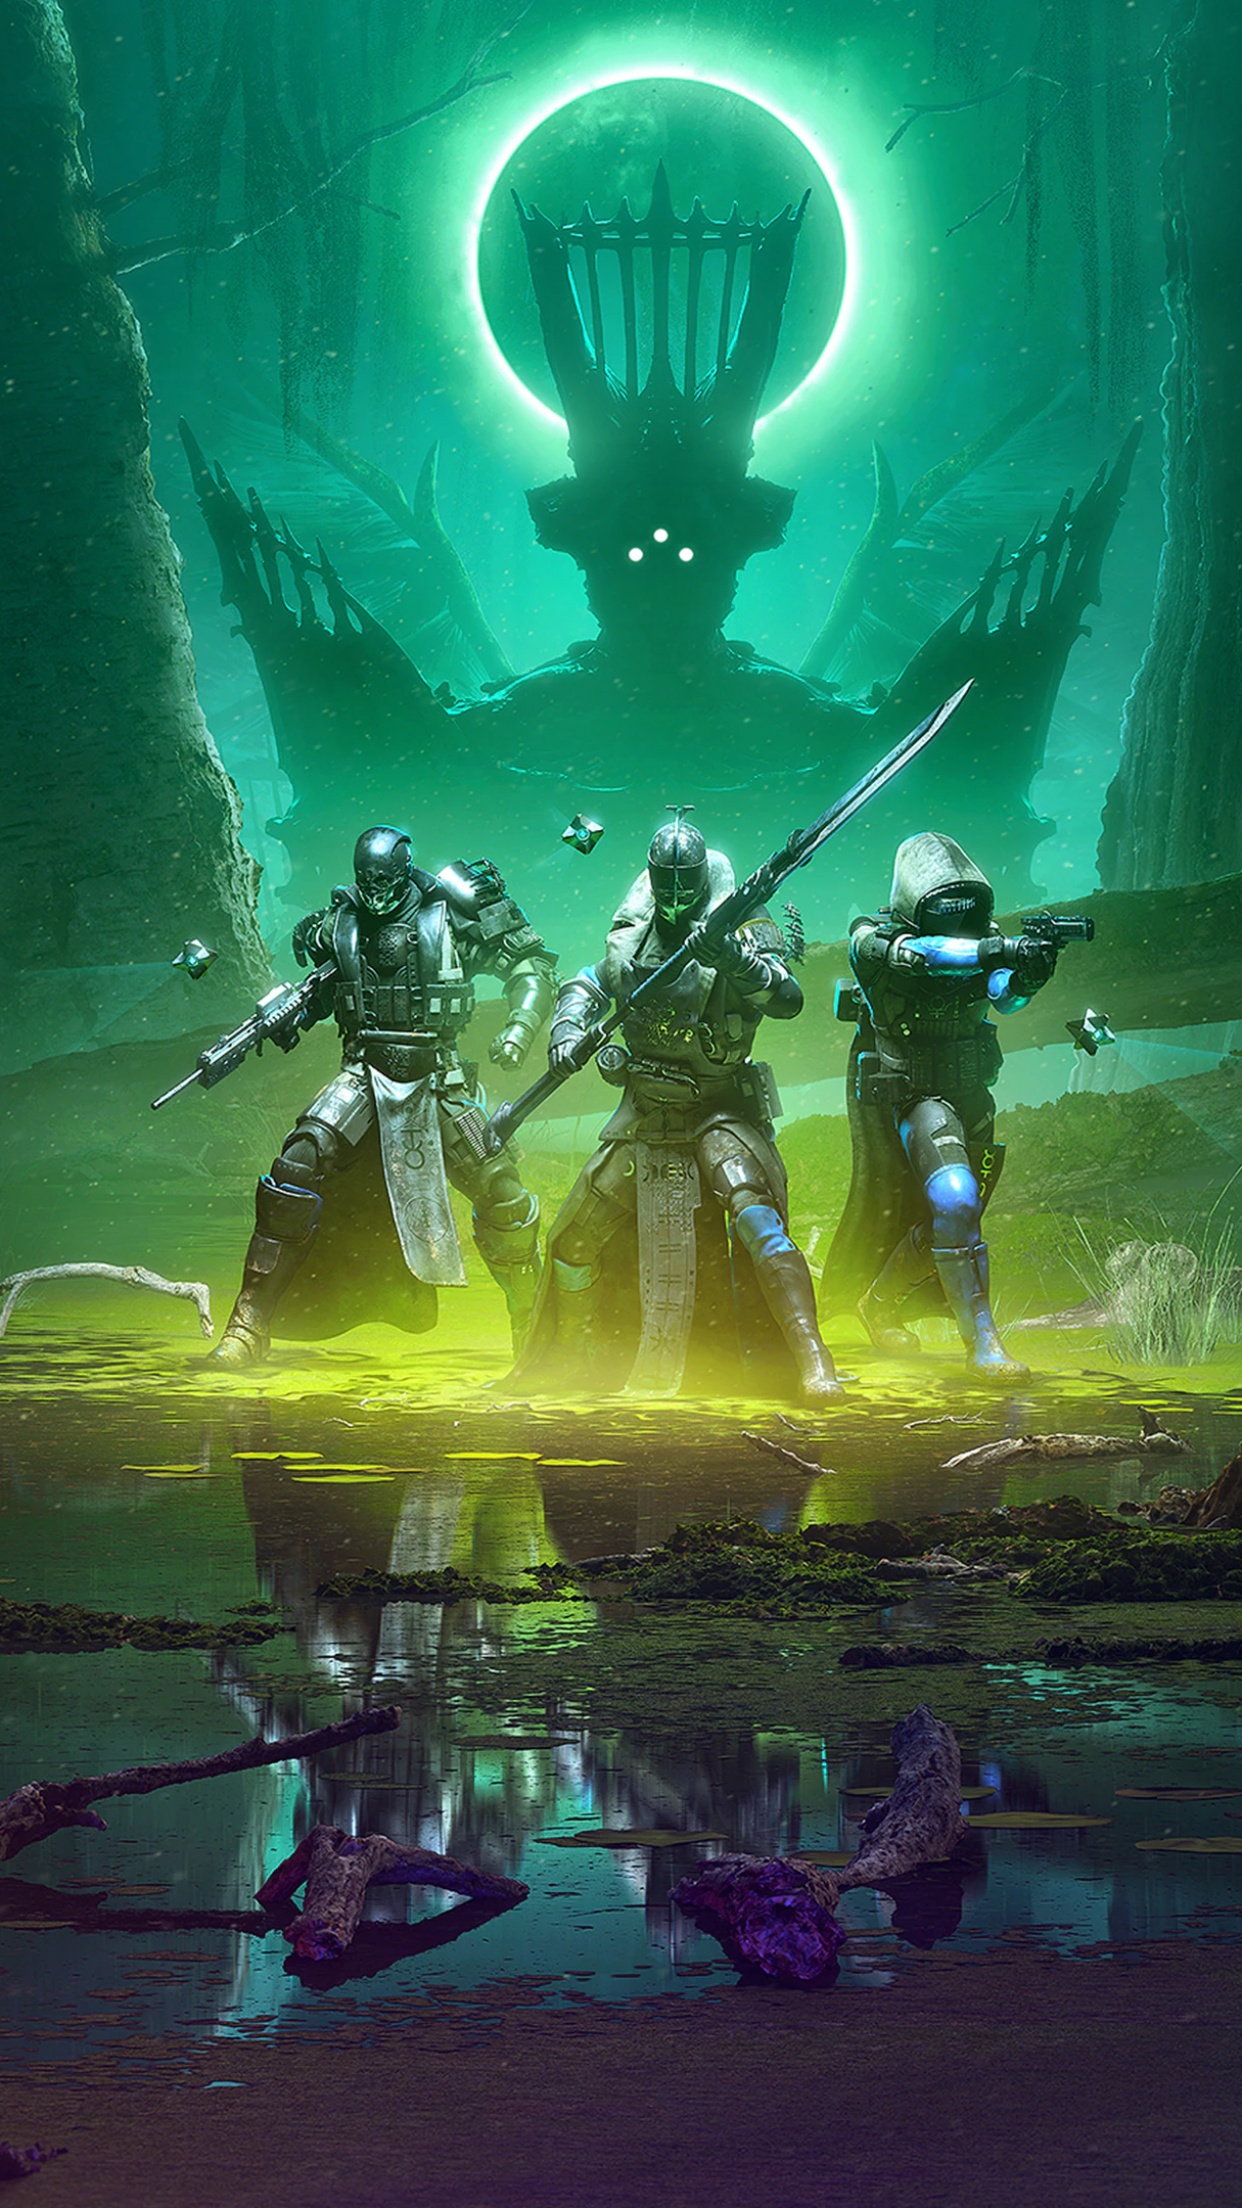 Destiny 2: The Witch Queen Wallpaper 4K, Bungie, 2022 Games, Games, #6343